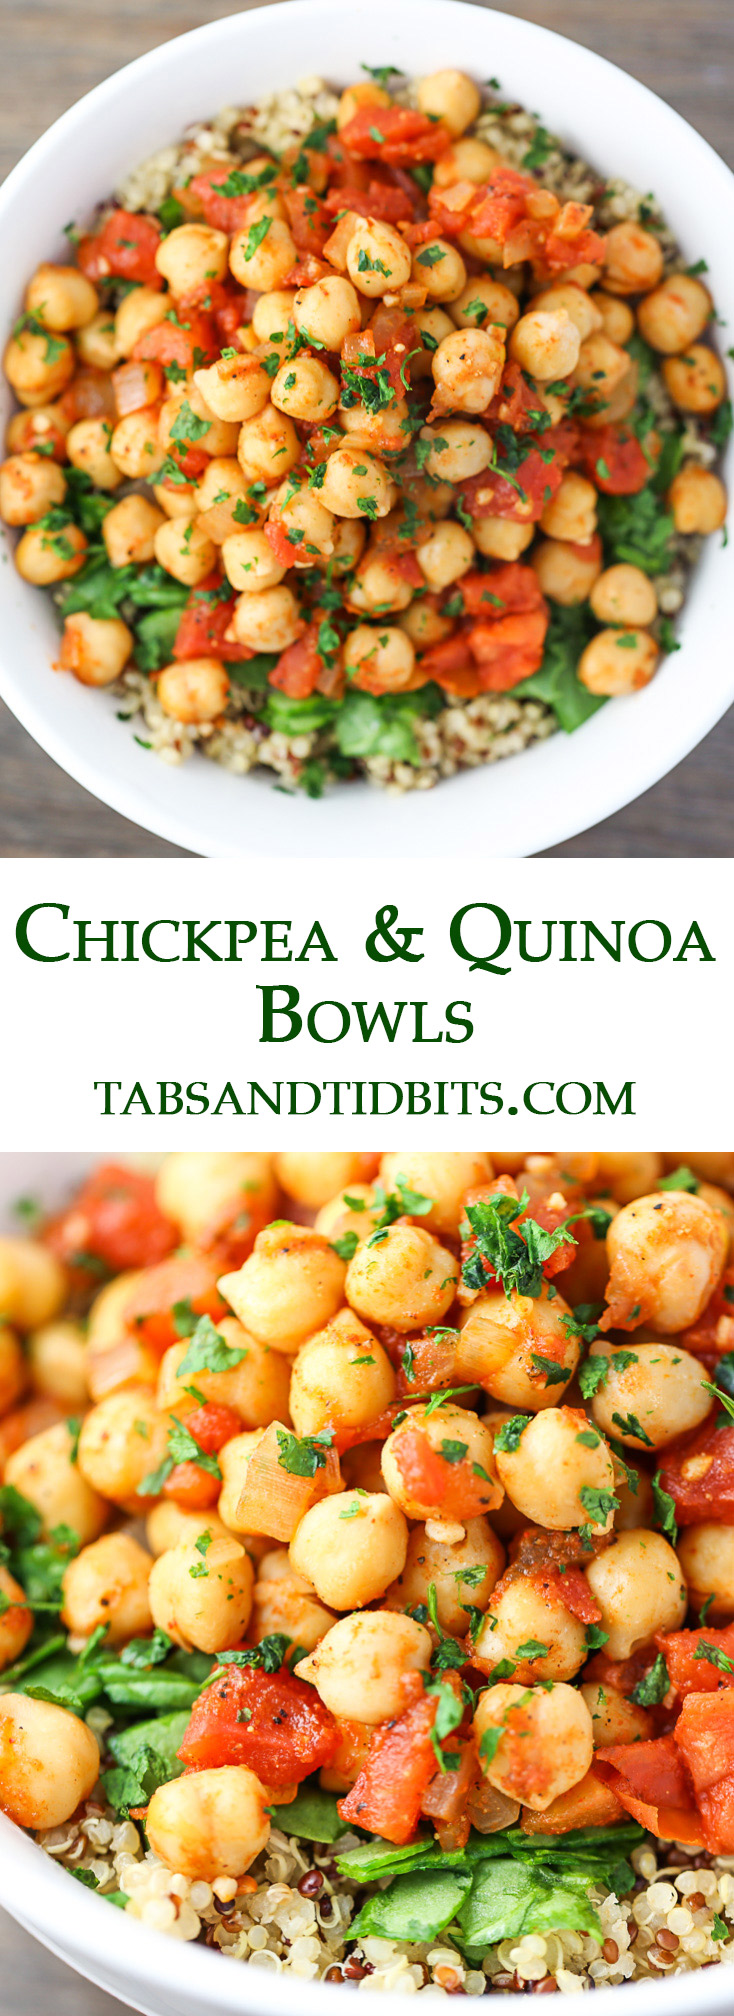 The Quinoa and Chickpea Bowls are quick to make and full of nutritious and delicious ingredients! Great for a healthy weeknight meal!